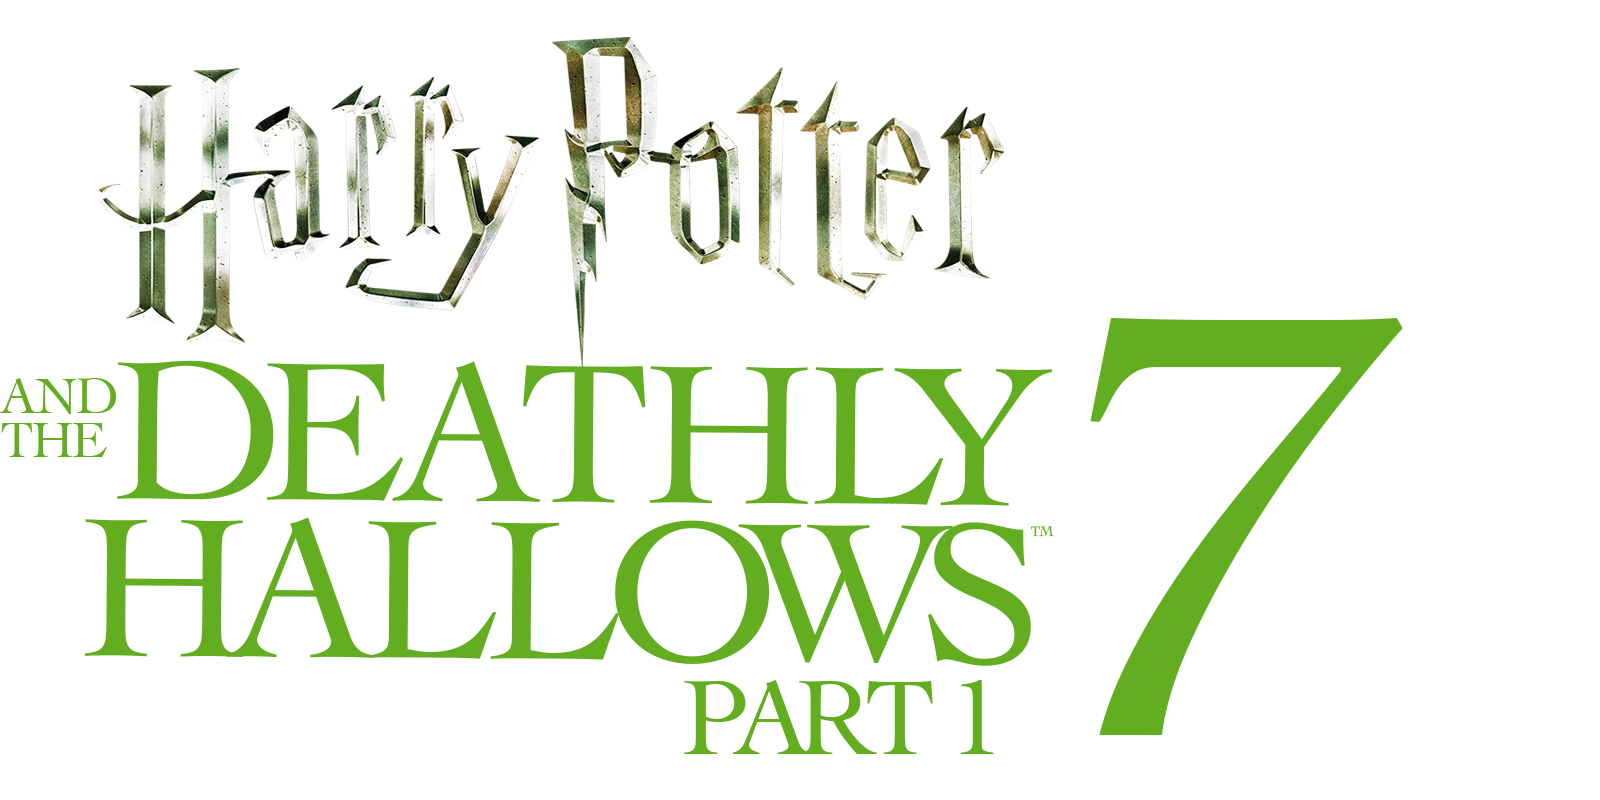 harry potter and the deathly hallows: part 1